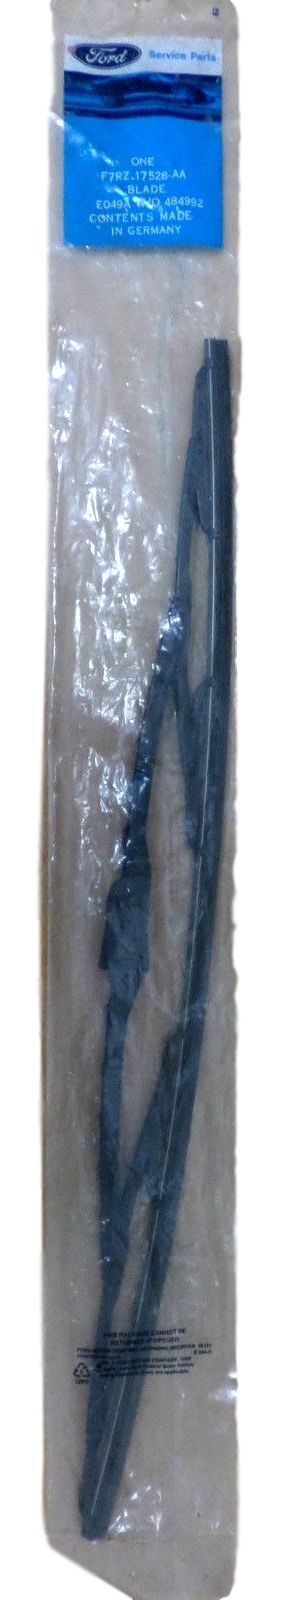 Ford OEM F7RZ-17528-AA Windshield Wiper Blade Assembly E049A 484992